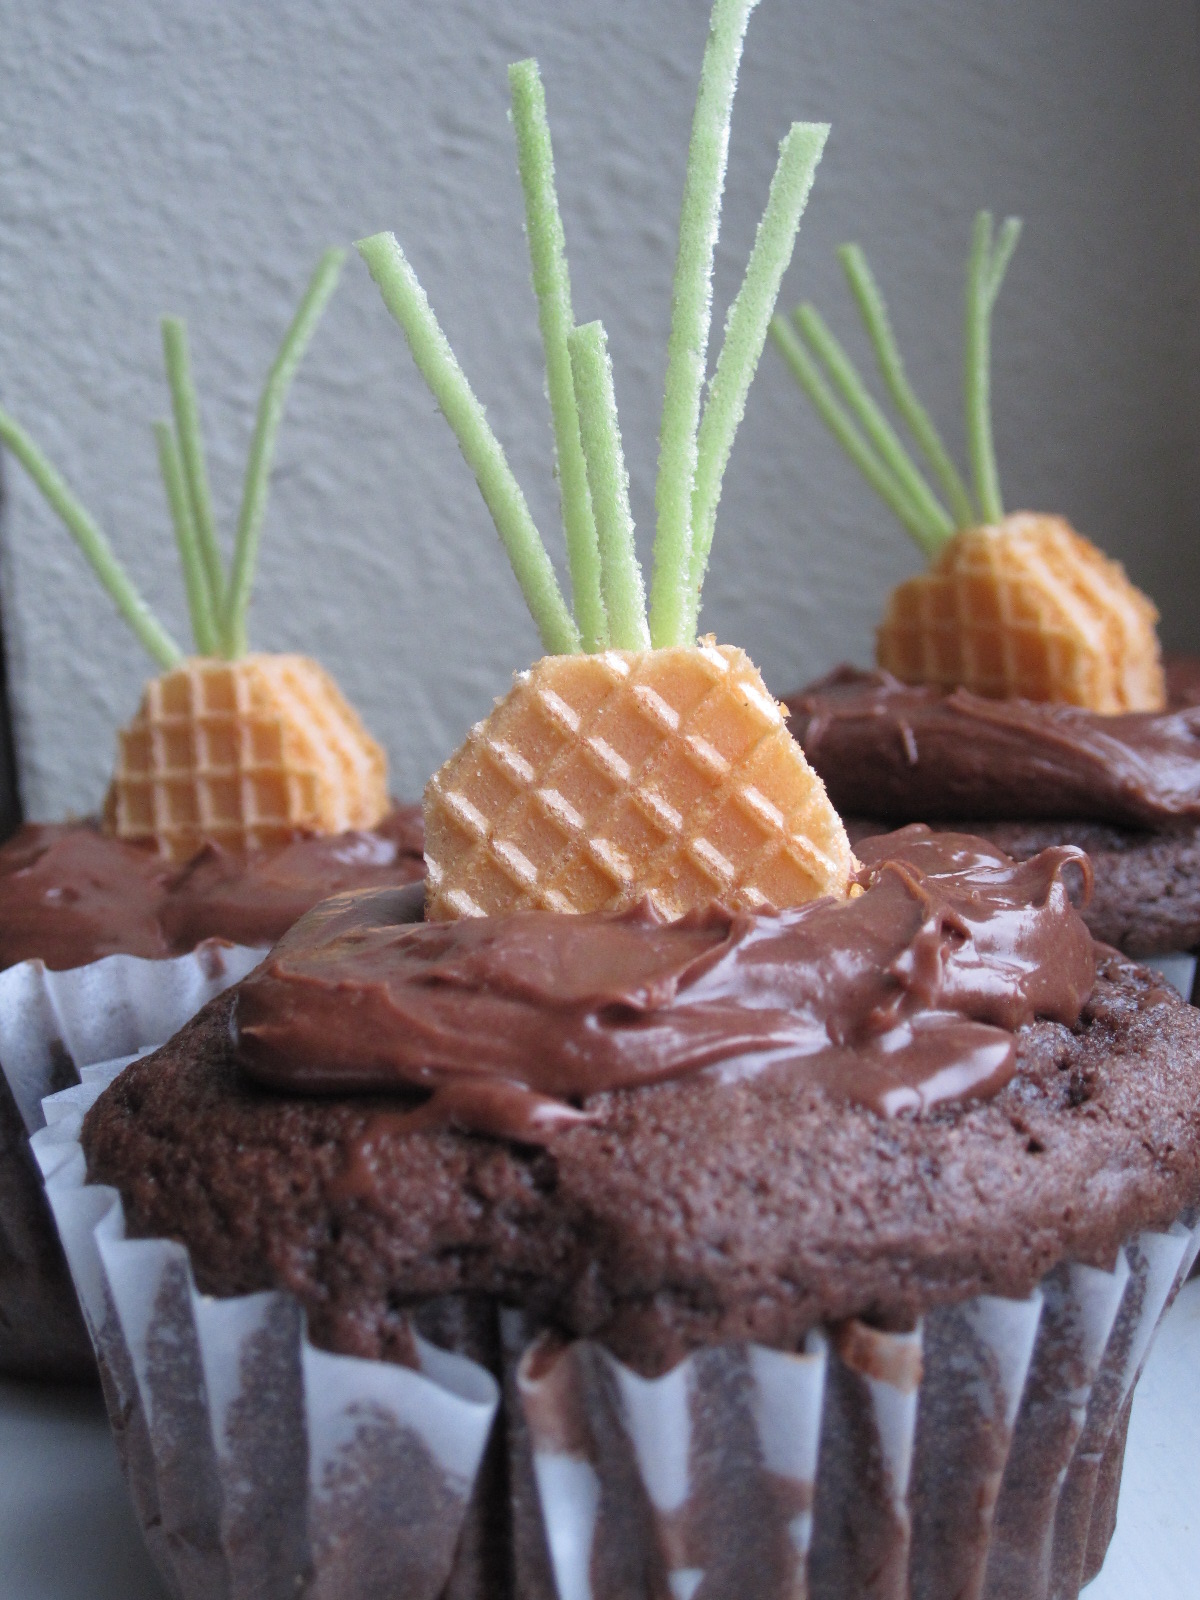 Easy Carrot Cupcakes